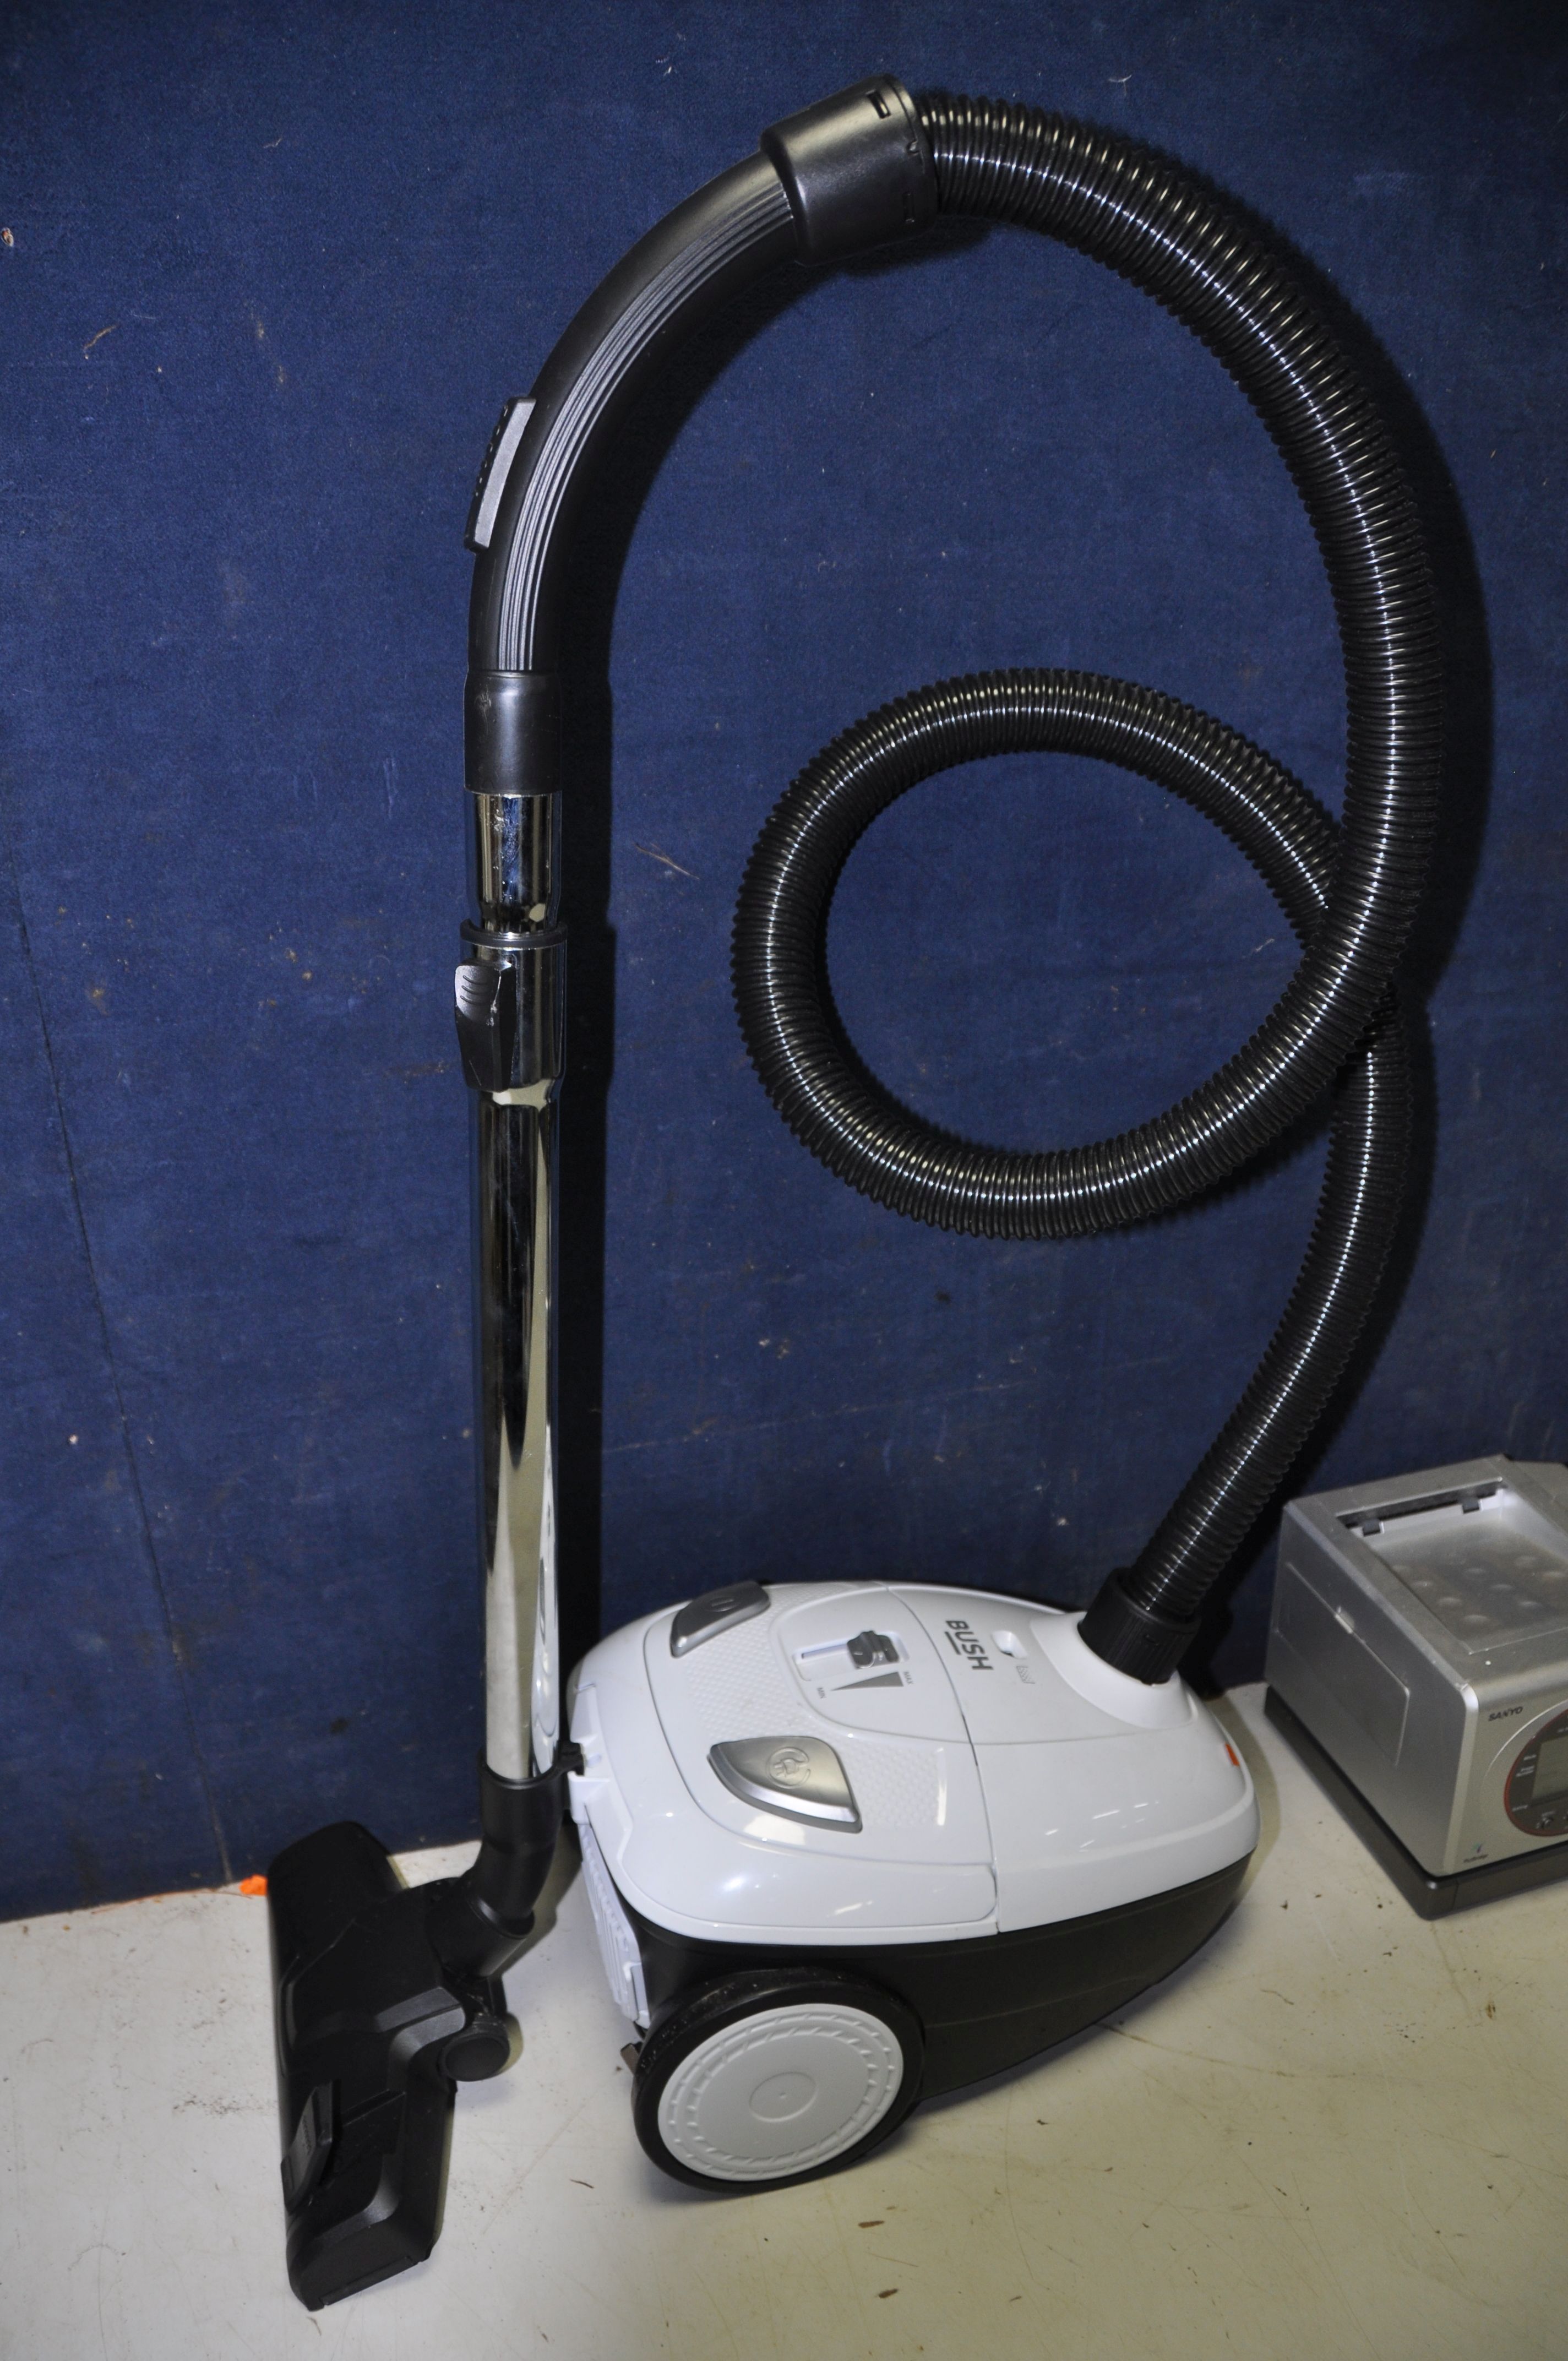 A BUSH VCB35B15C VACUUM CLEANER along with a Sanyo DVP-P1EX printer (both UNTESTED) (2) - Image 2 of 3